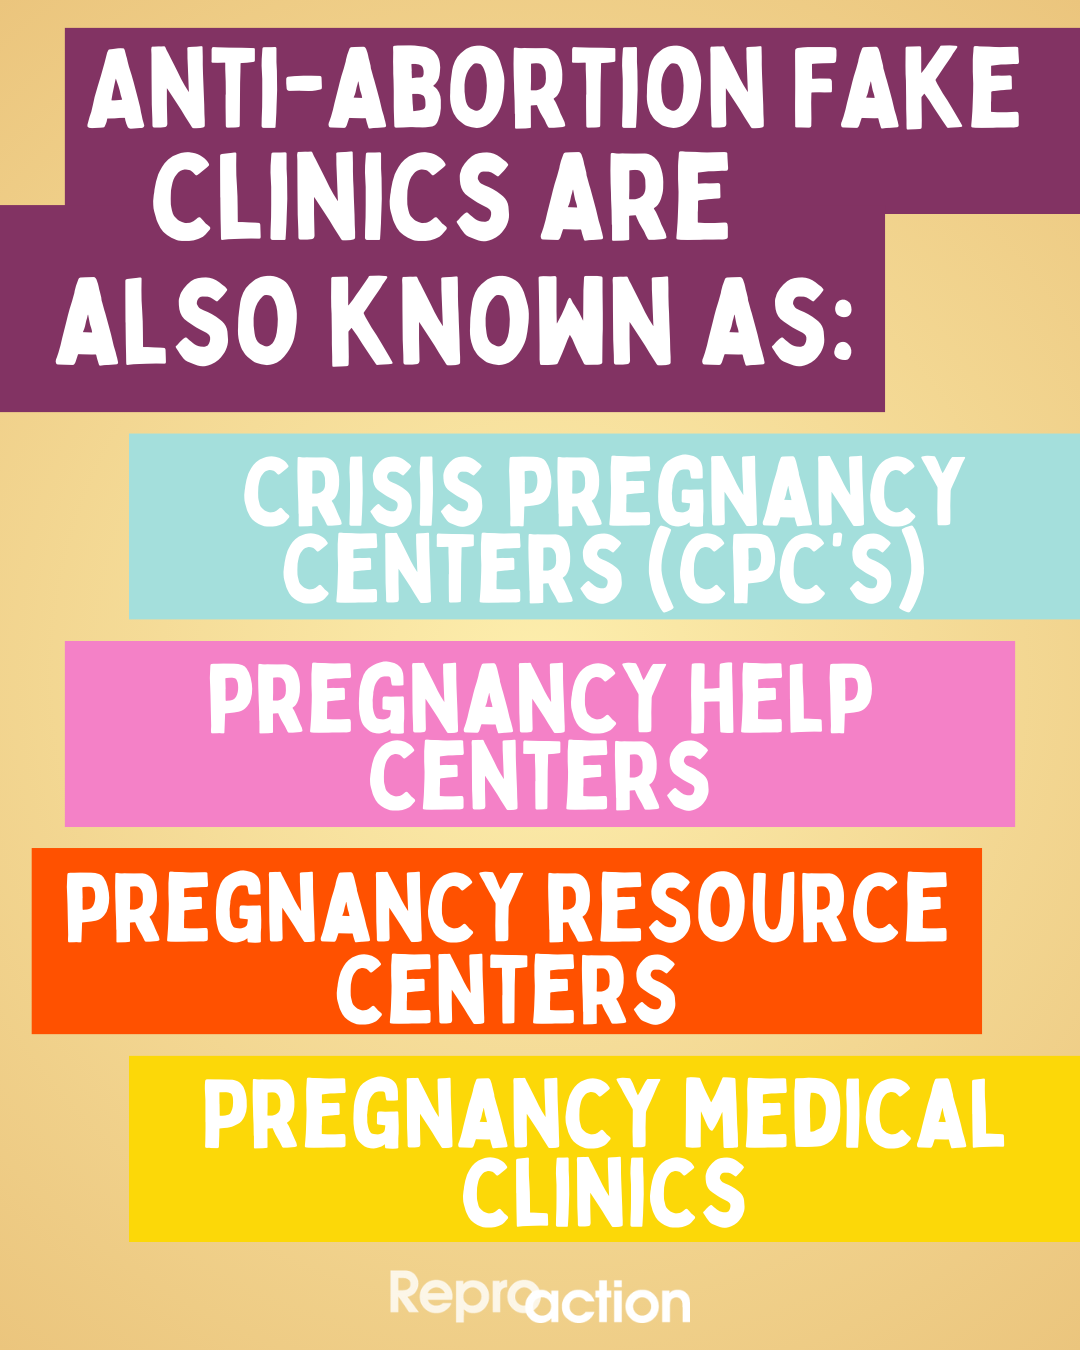 A tan background reads “Anti-Abortion Fake Clinics are also known as: Crisis Pregnancy Centers (CPC’s), Pregnancy Help Centers, Pregnancy Resource Centers, Pregnancy Medical Clinics” below this is the Reproaction logo in white.